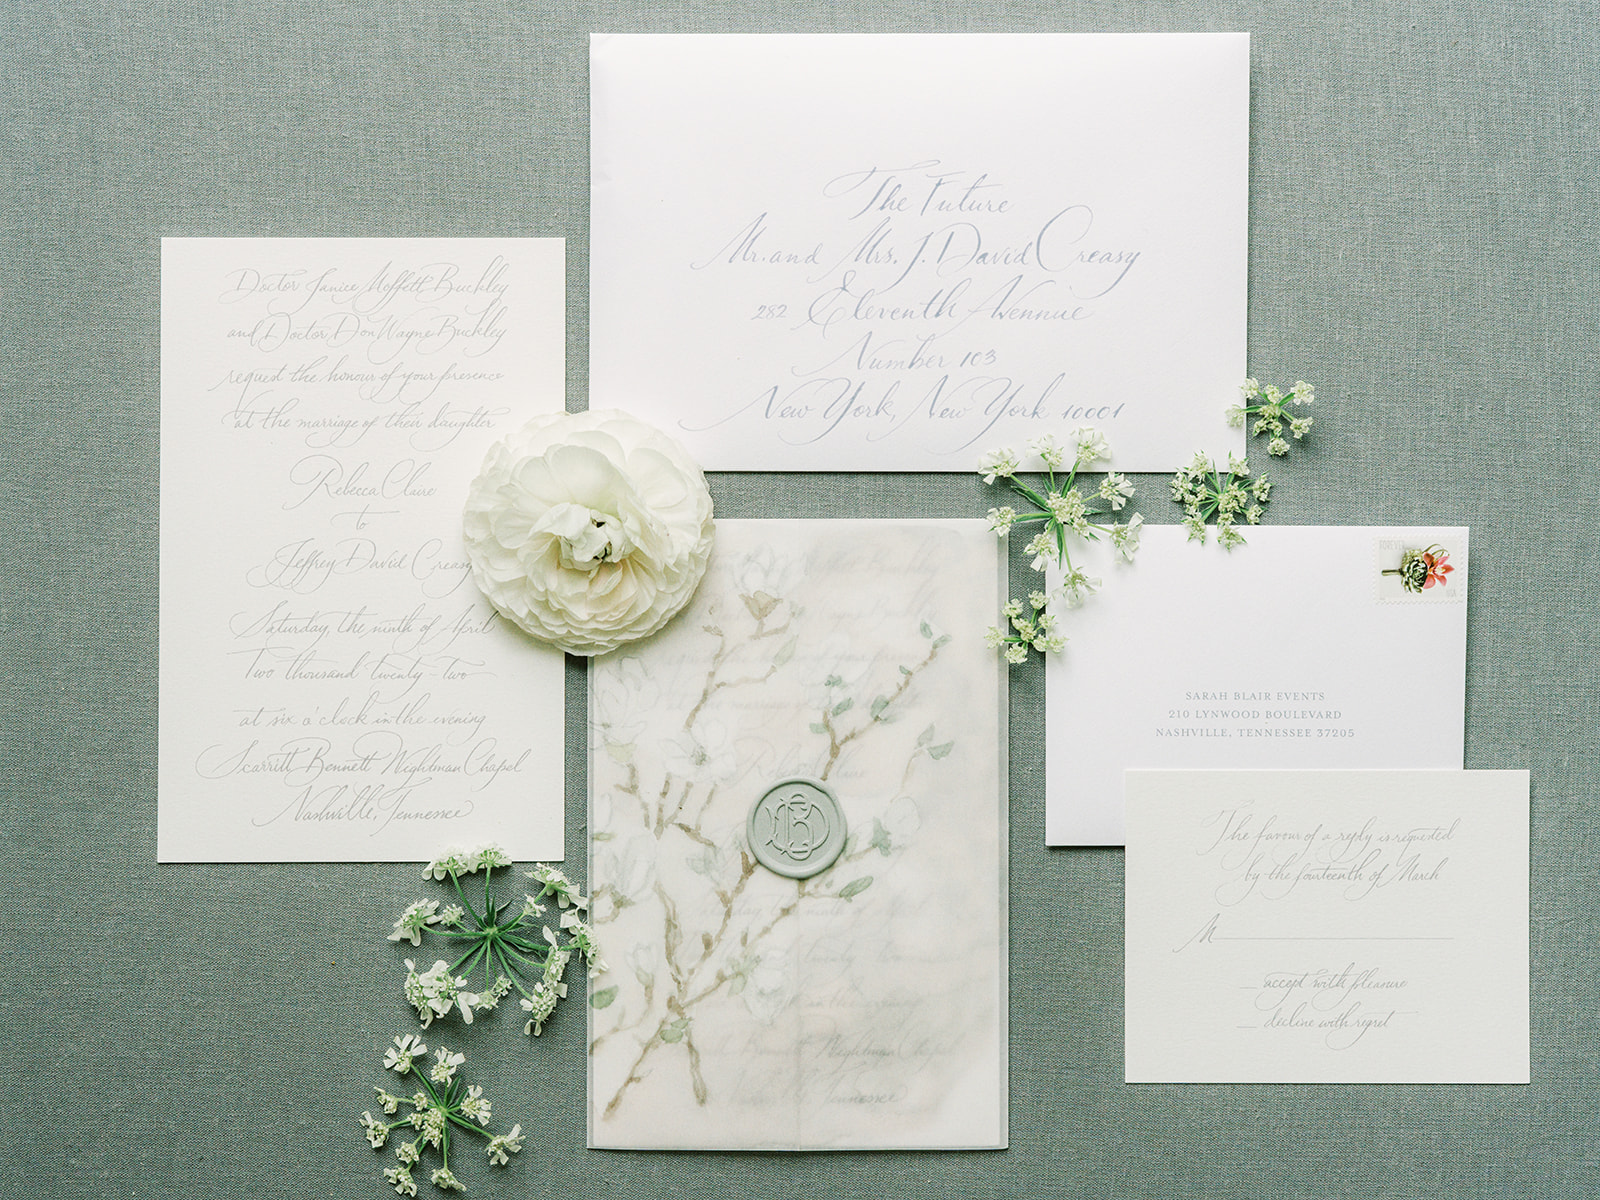 Elegant and classic spring southern wedding in downtown Nashville, TN Scarritt Bennett Center. Garden-inspired spring wedding in colors of white, green, and lavender featuring spring fruiting branches,  peonies, roses, ranunculus. Design by Rosemary and Finch Floral Design in Nashville, TN.